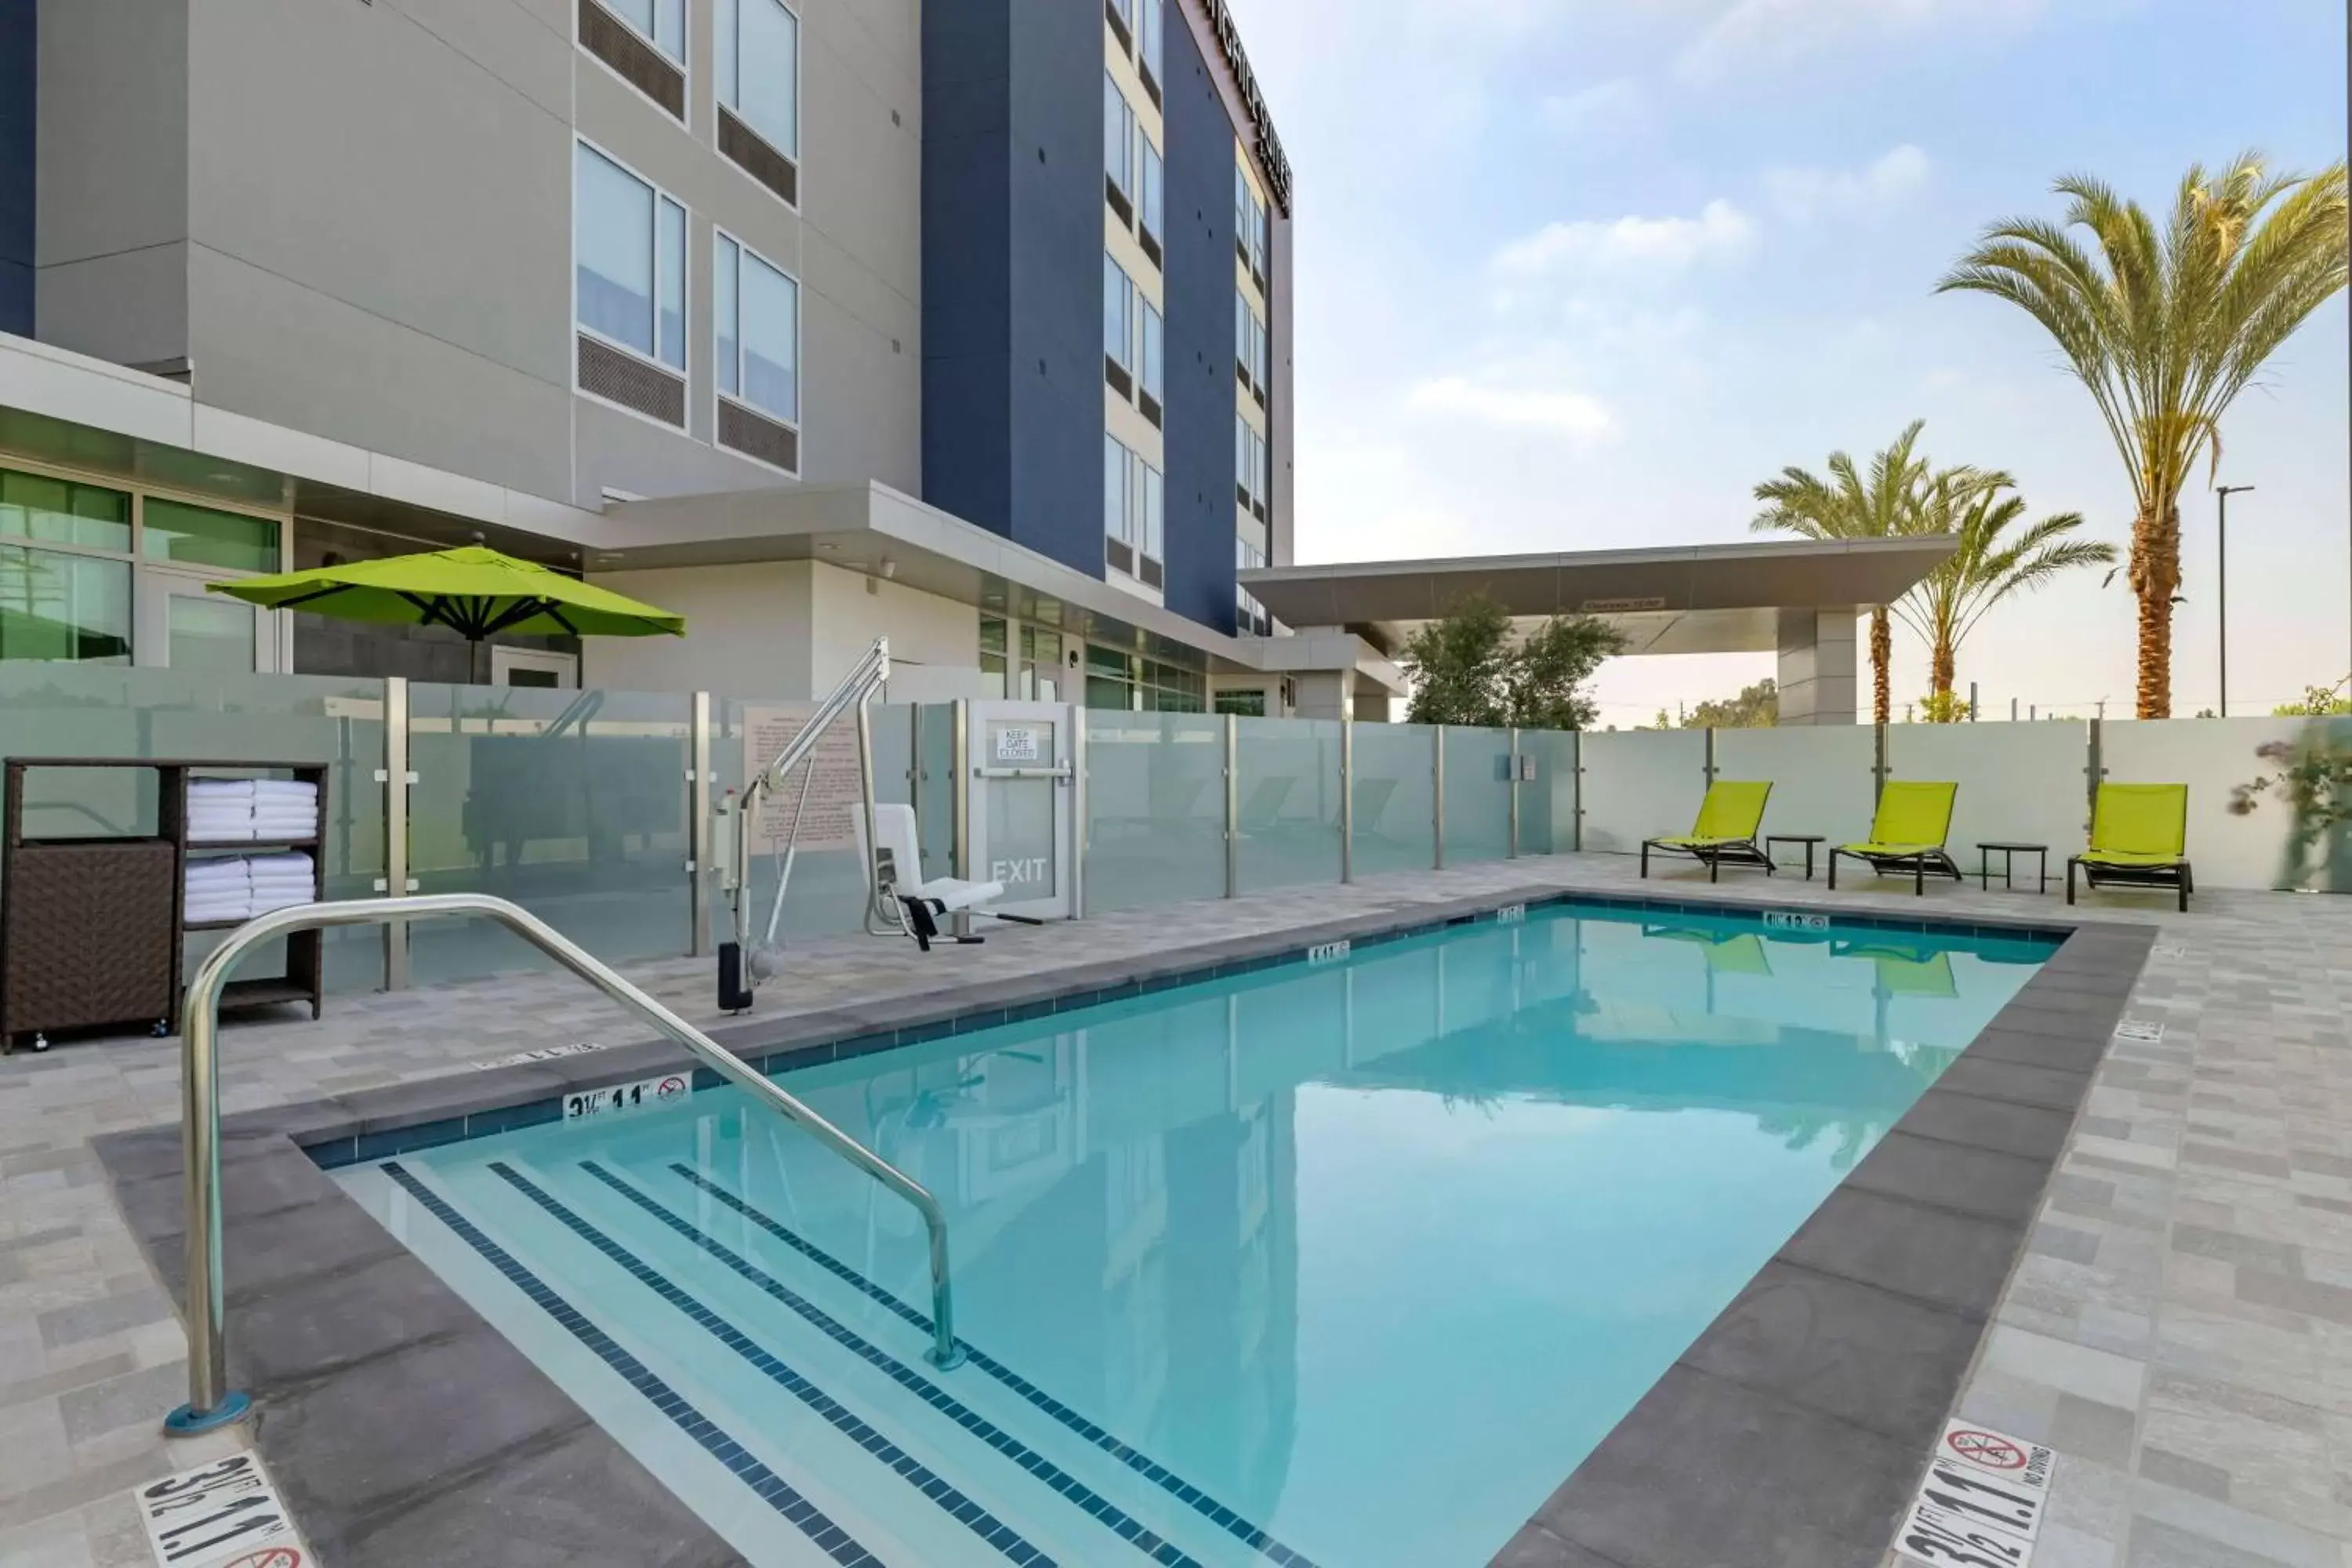 Swimming Pool in SpringHill Suites by Marriott Anaheim Placentia Fullerton